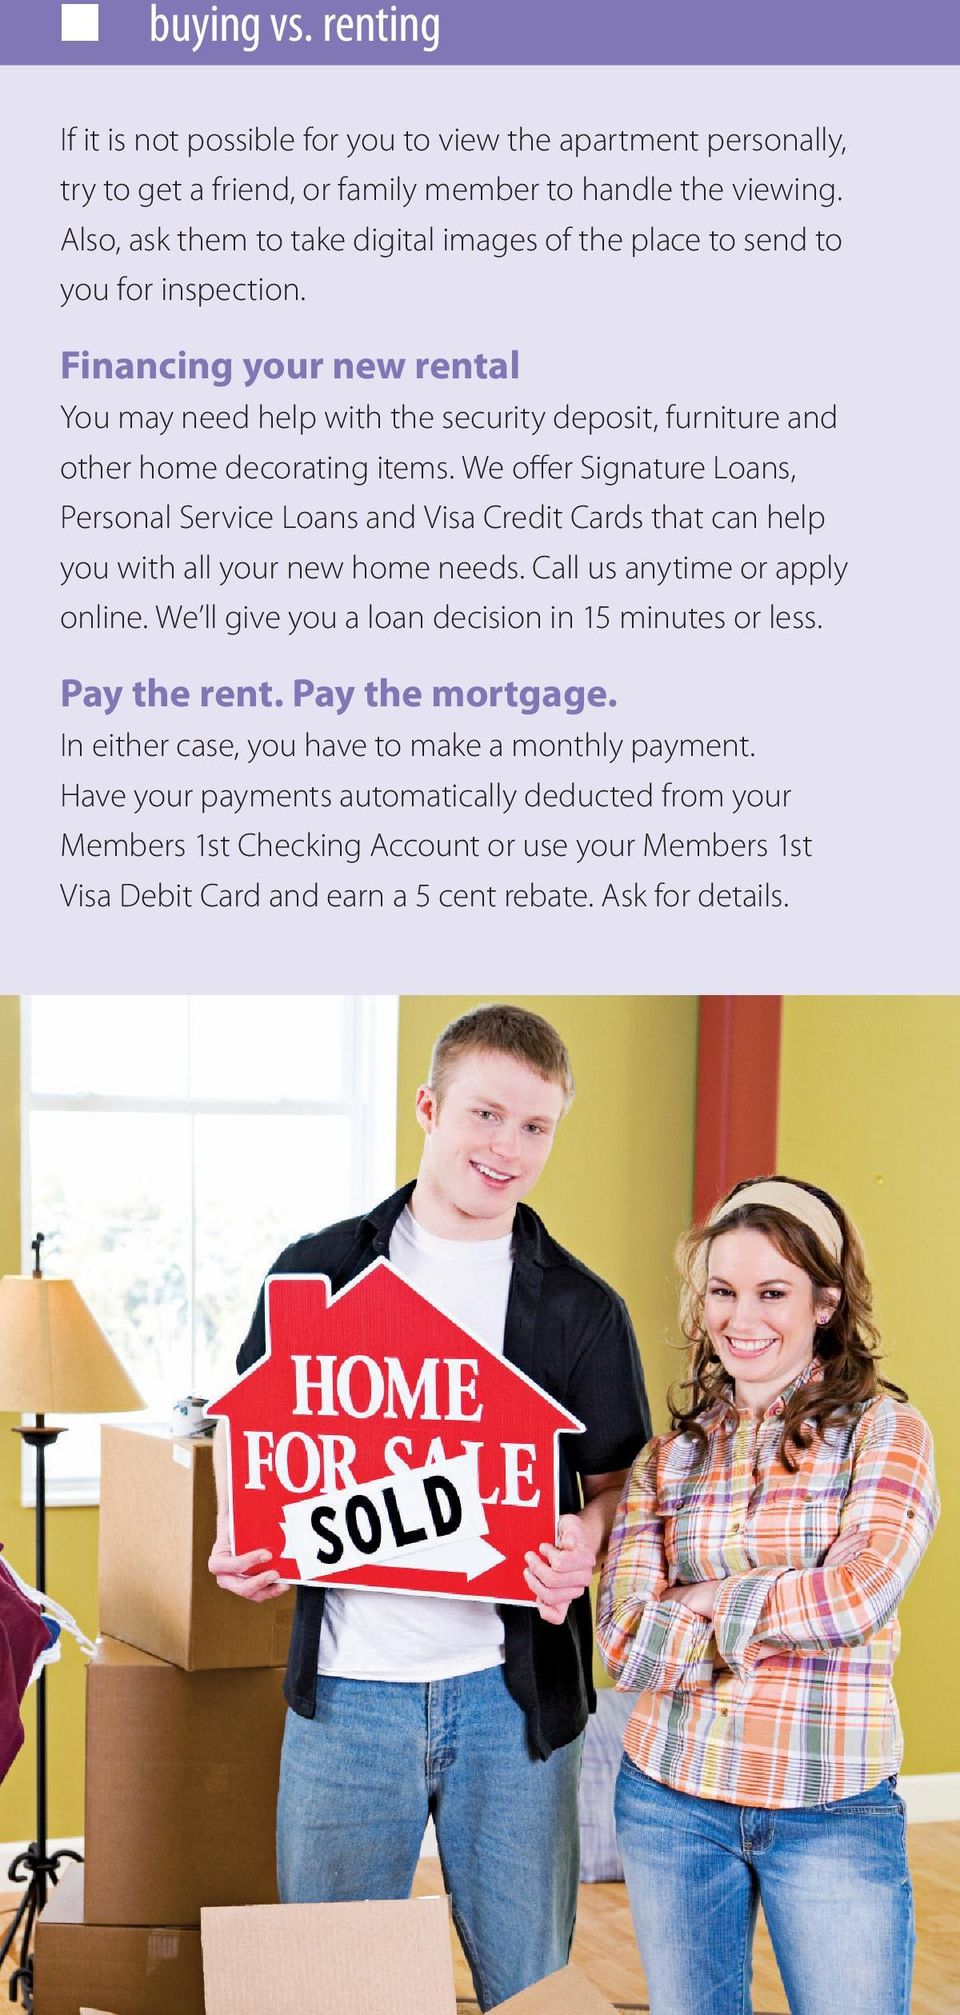 We offer Signature Loans, Personal Service Loans and Visa Credit Cards that can help you with all your new home needs. Call us anytime or apply online.